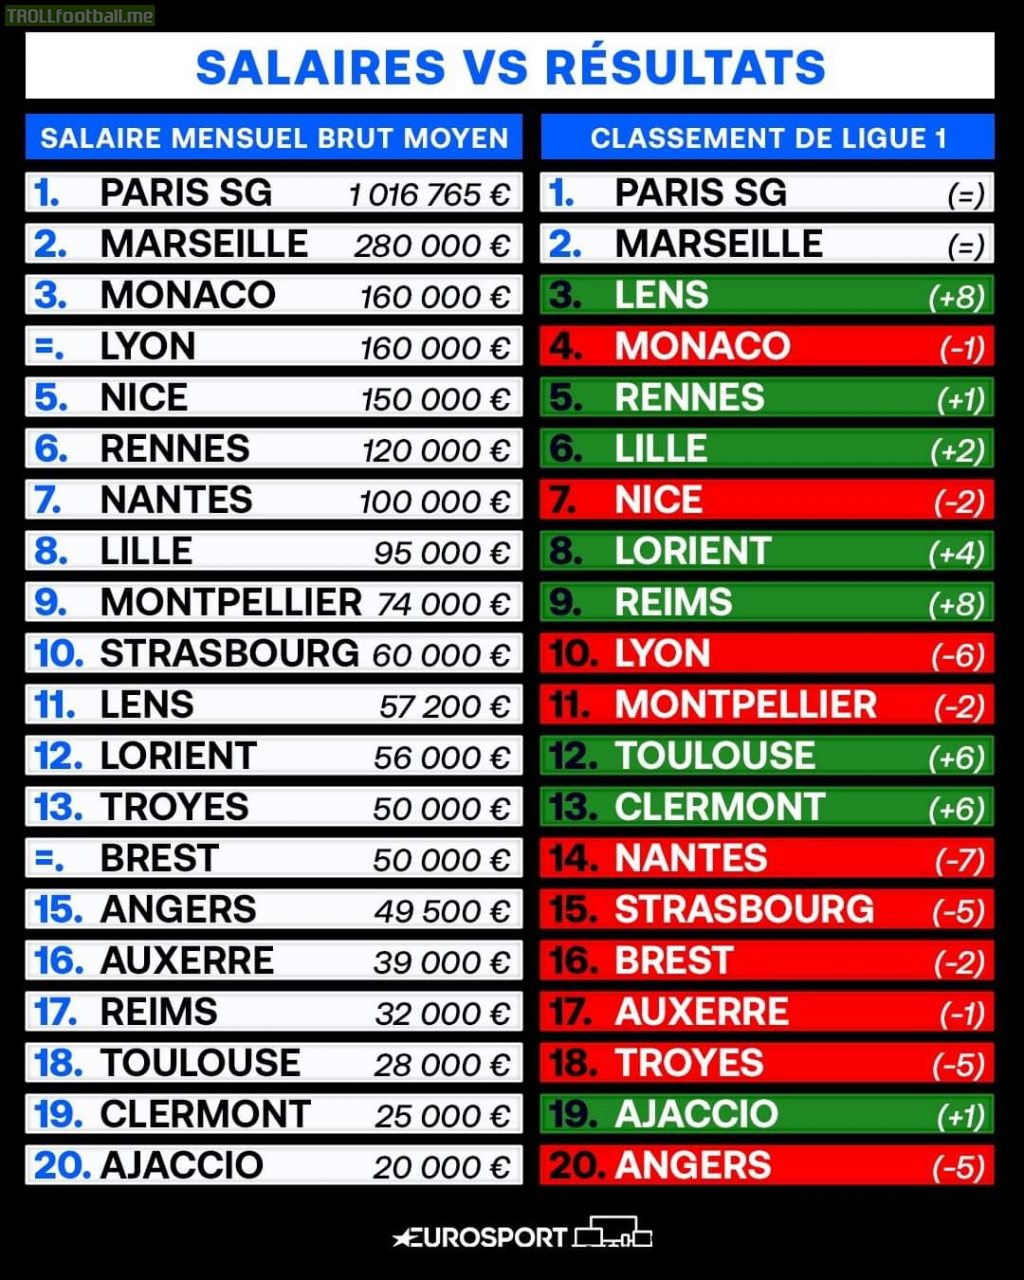 Ligue 1 : Average monthly salary vs. Current position